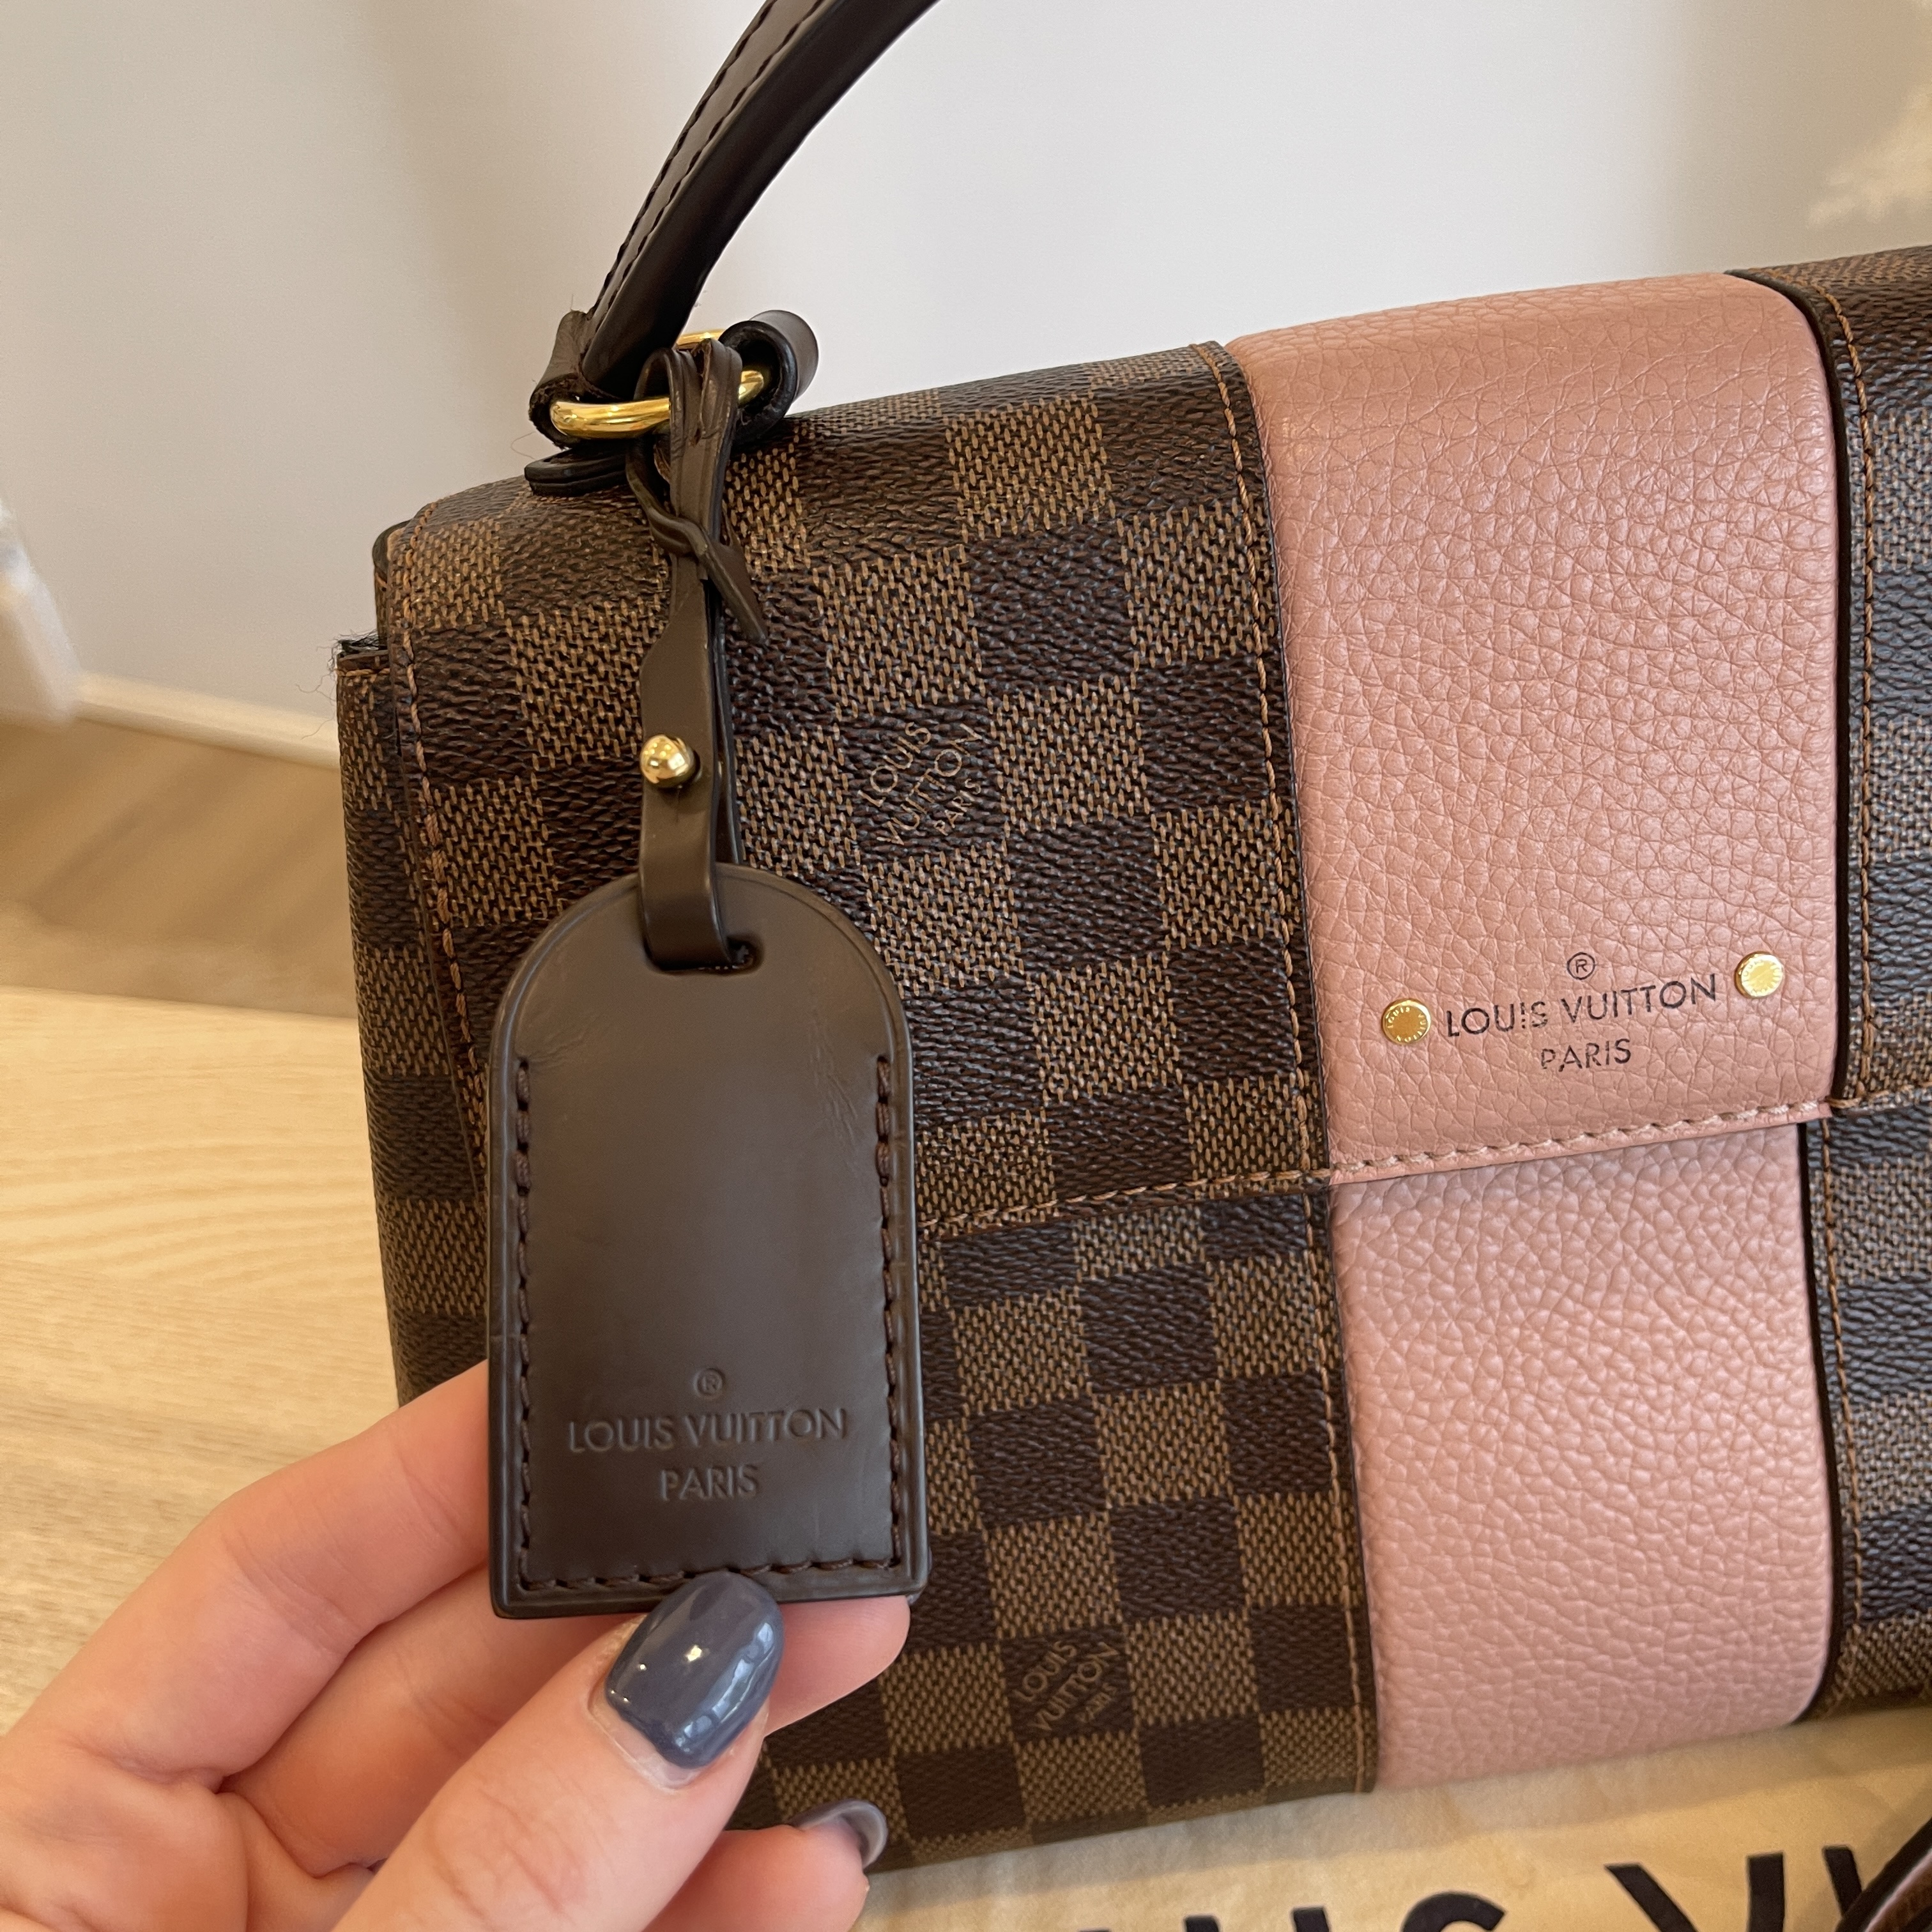 What's in my LV bag? Louis Vuitton Bond Street BB review and what